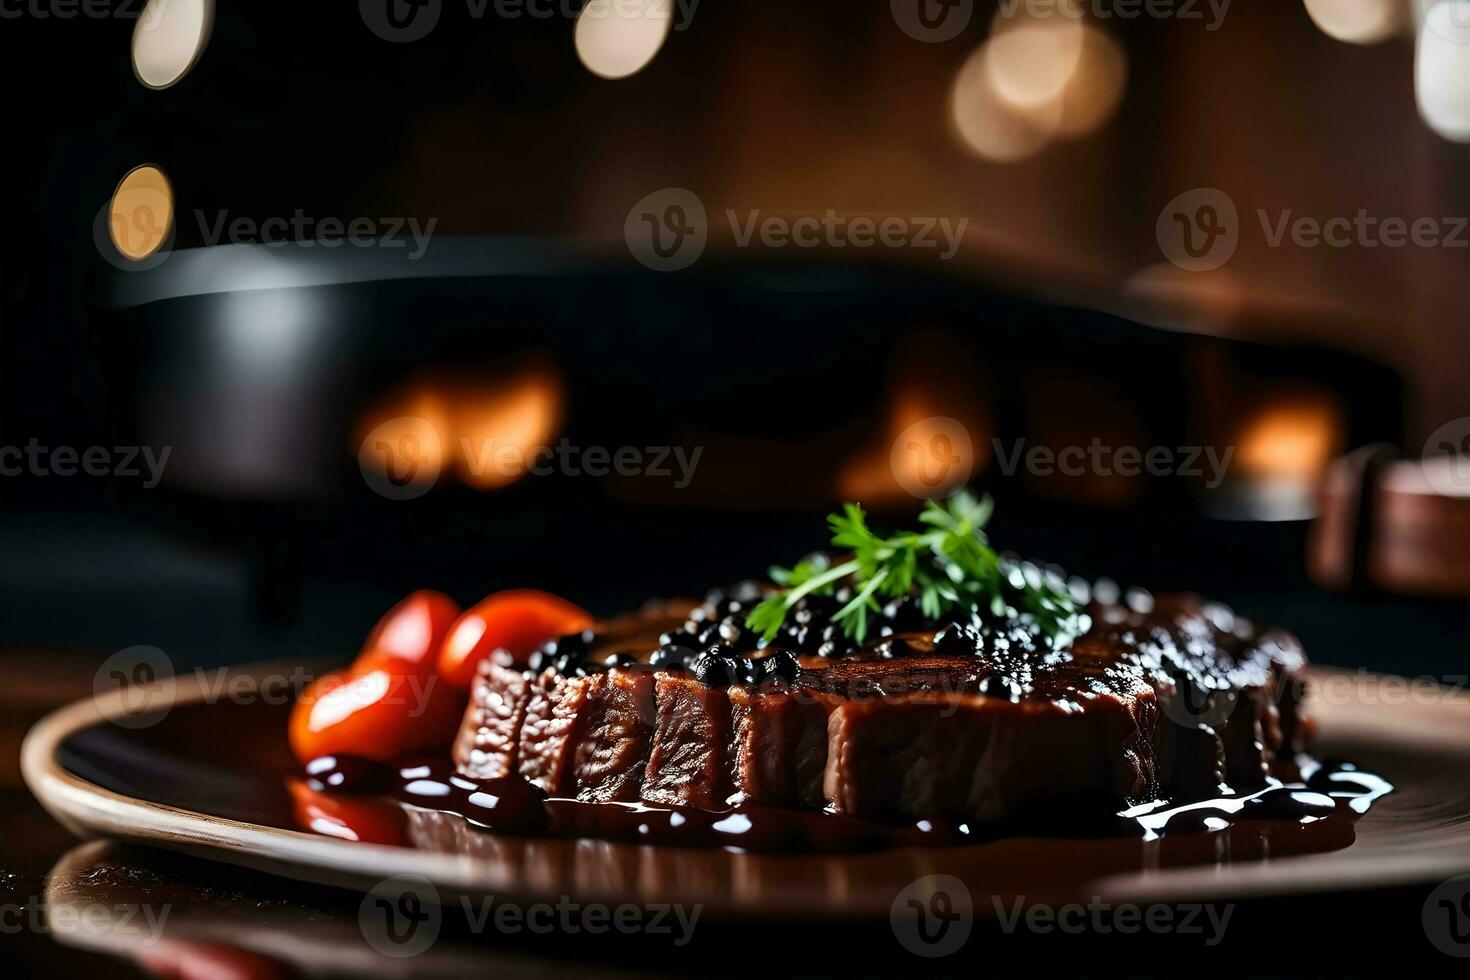 In the picture, the dish that stands out the most is a meal made with beef and sauce made from black beans The background is hard to see AI Generated photo